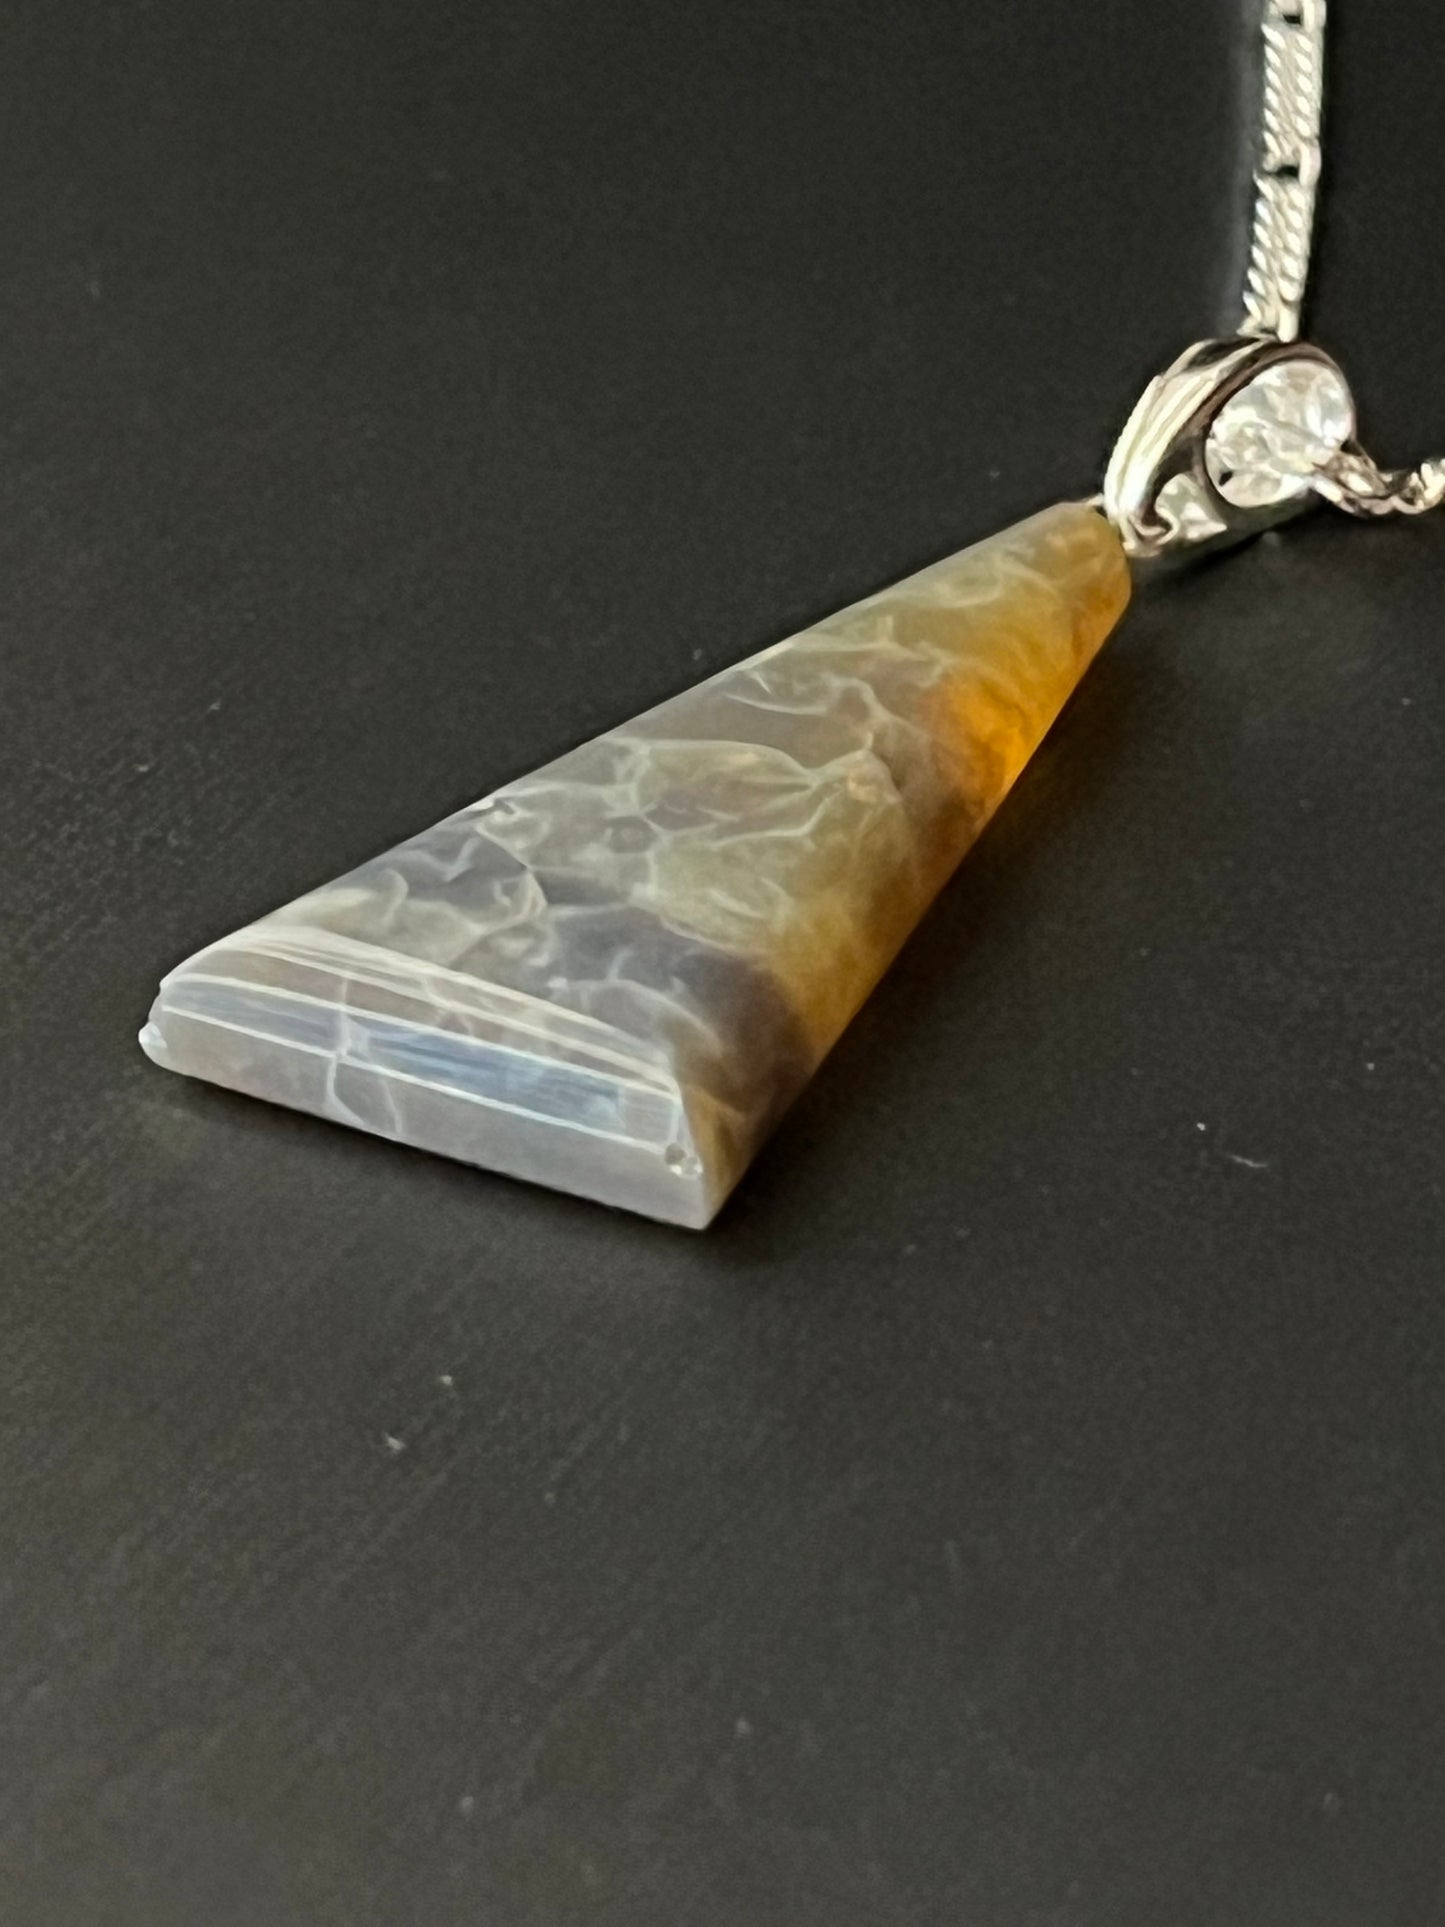 20.29 carat Australian Opal pendant in sterling silver. This unique piece of jewelry is authentic Alaska Native art created by an enrolled member of an Alaska Native tribe and is a certified Made in Alaska item. 